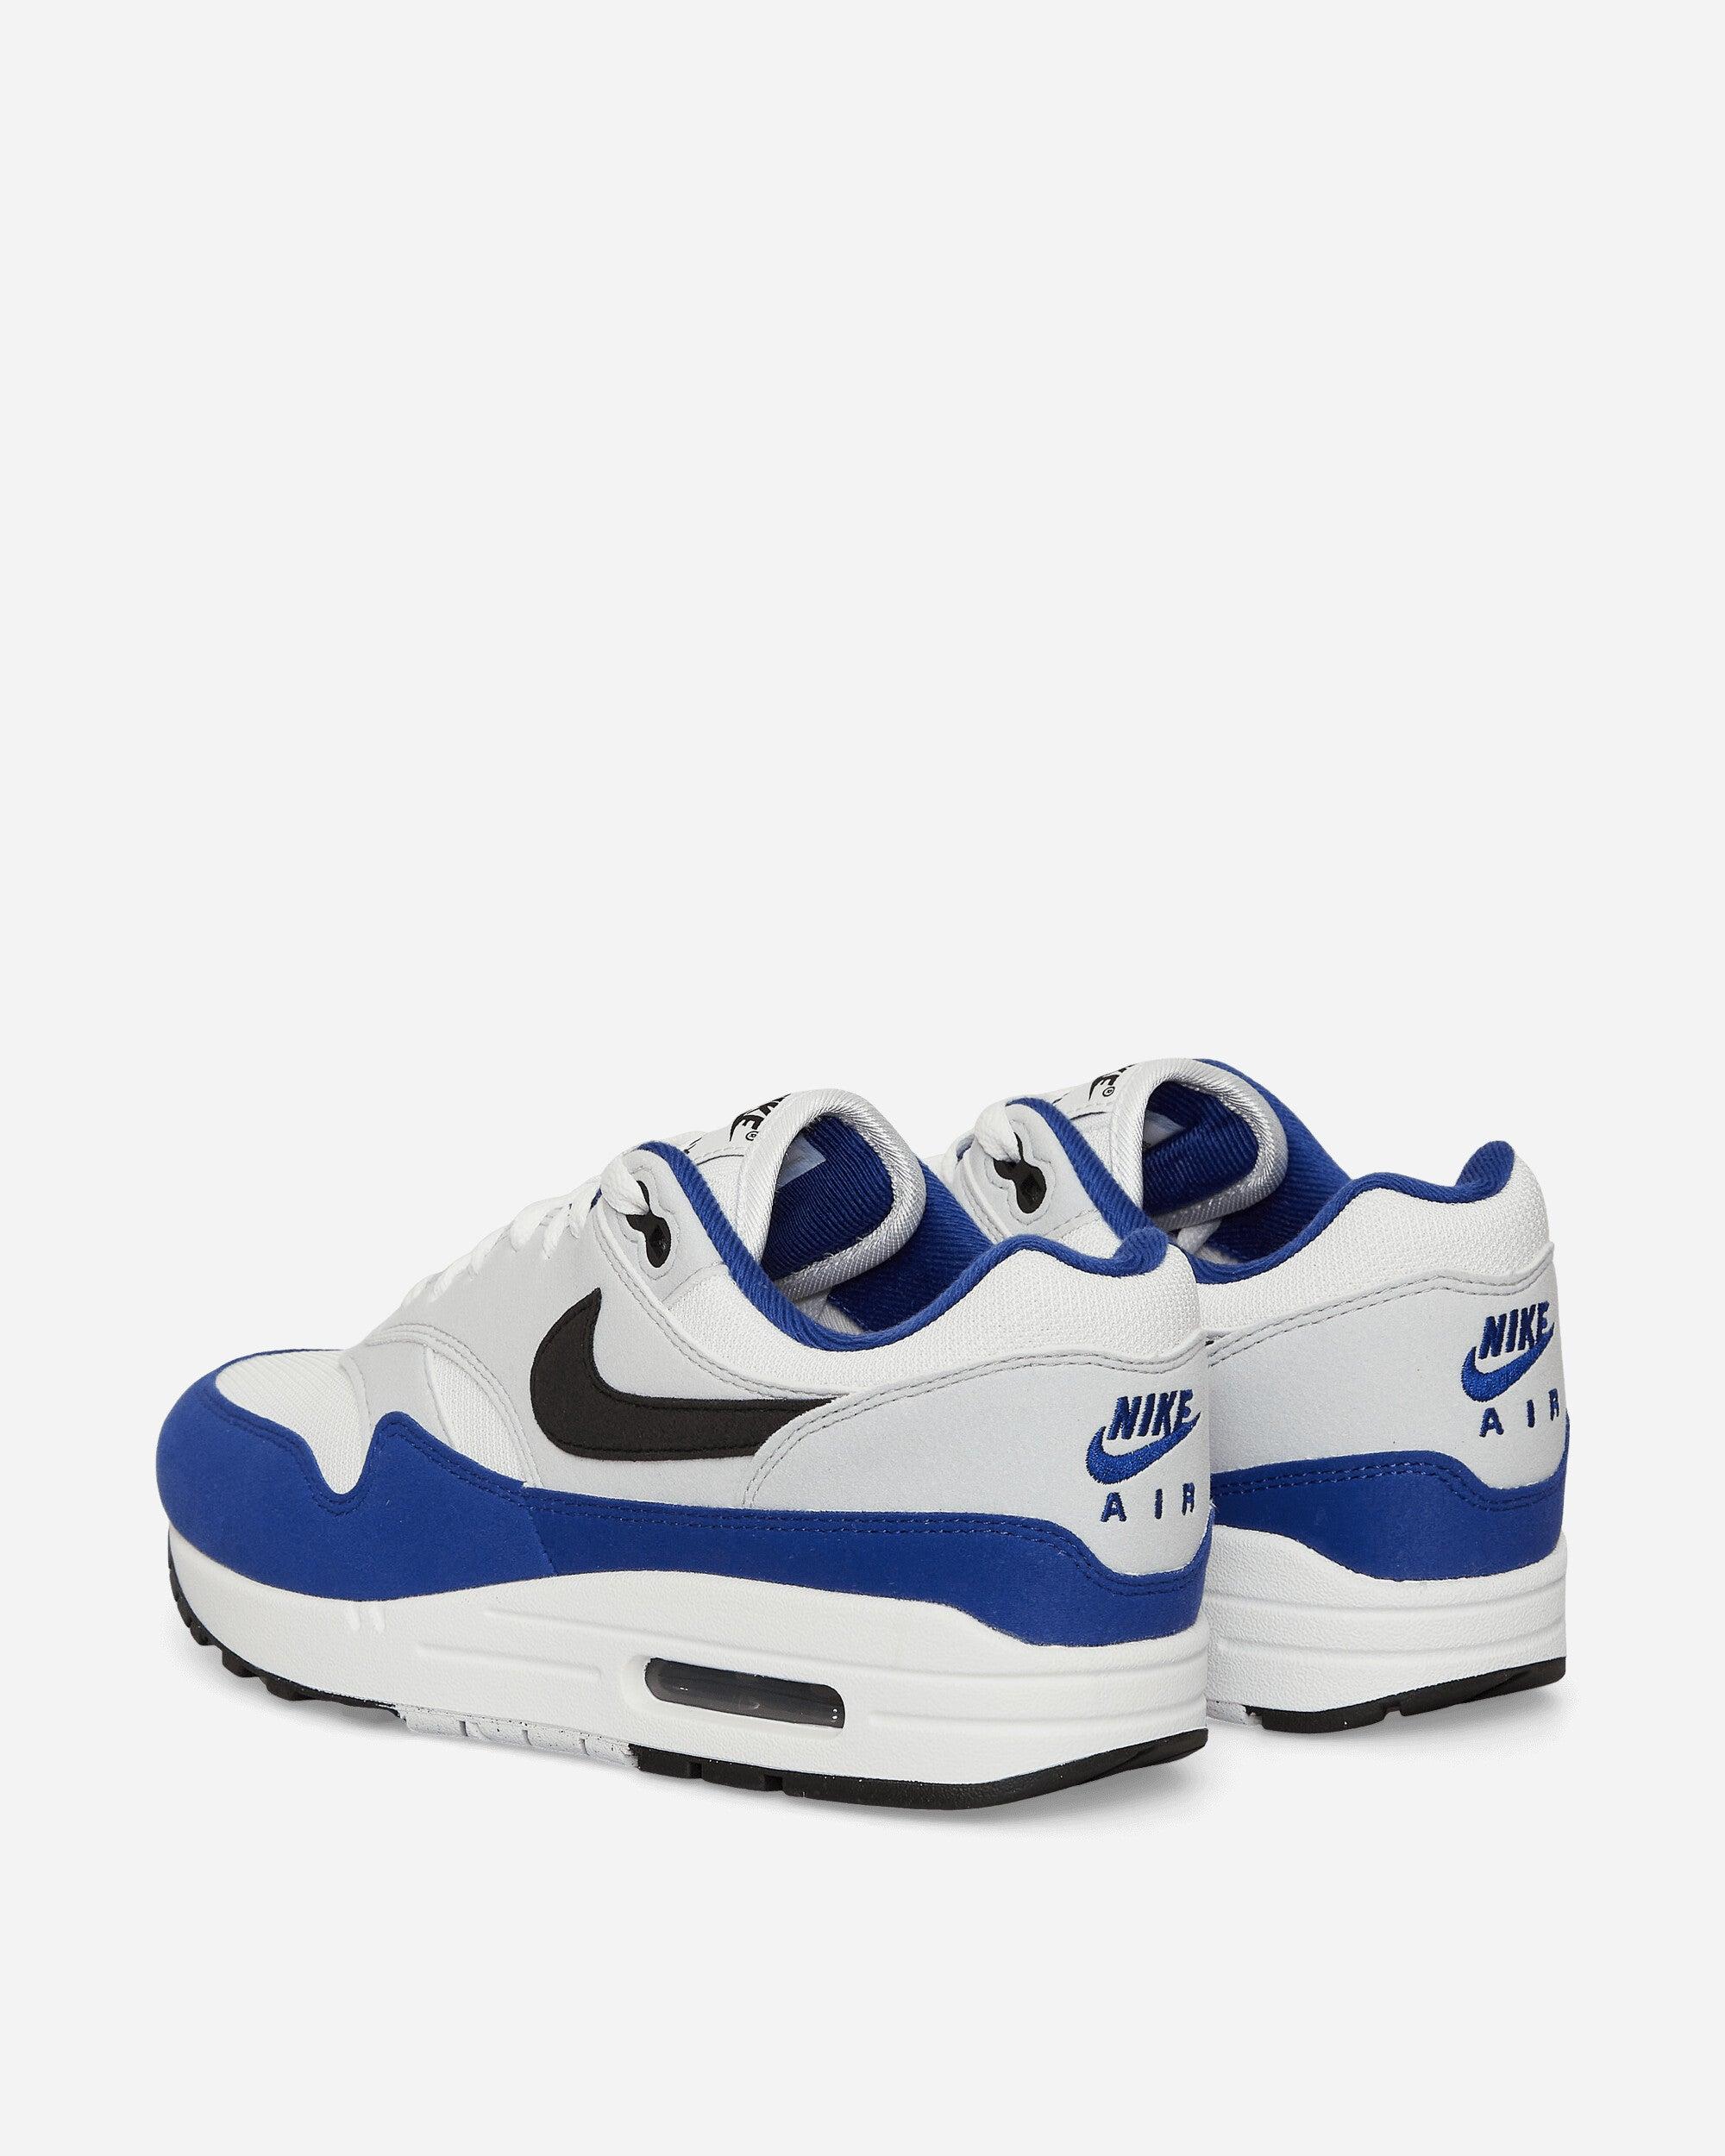 Nike Air Max 1 Sneakers White / Deep Royal Blue for Men | Lyst